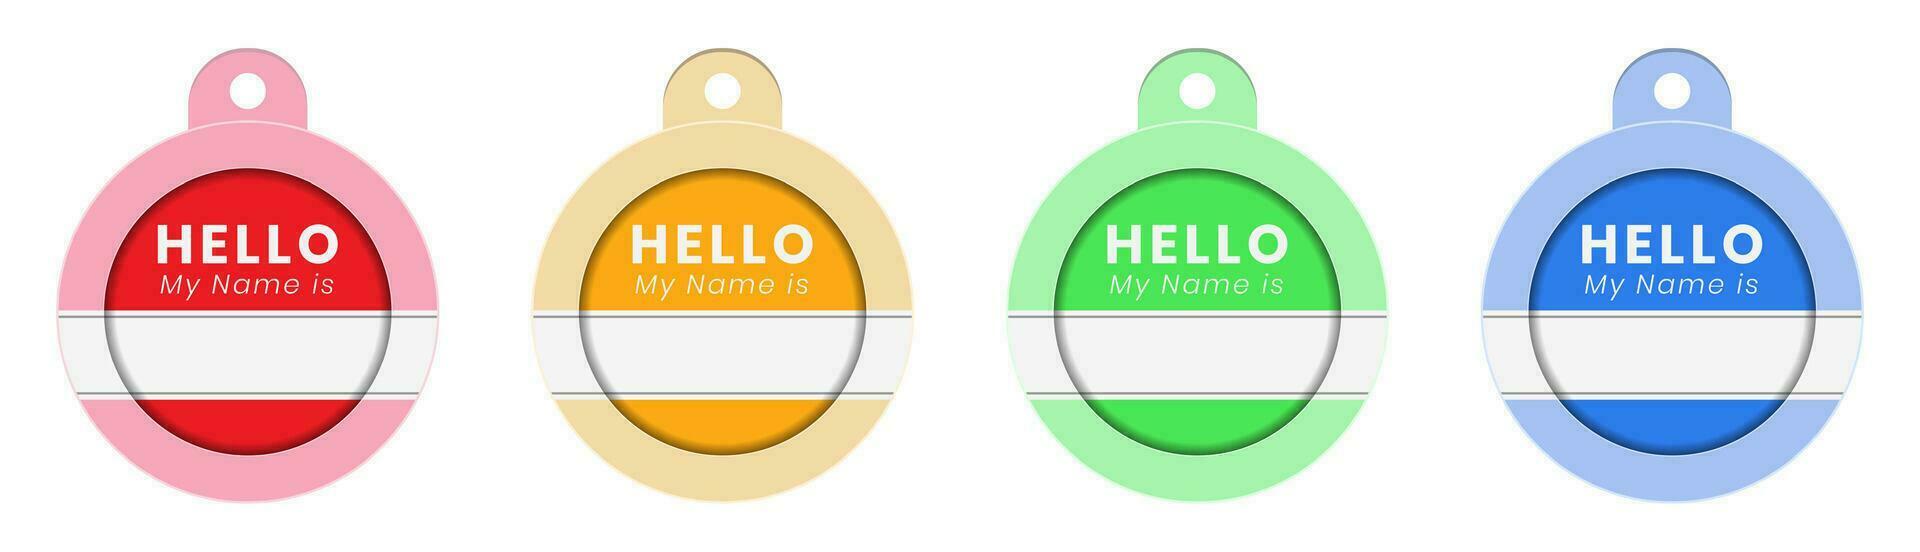 Name tag label - Hello, my name is vector